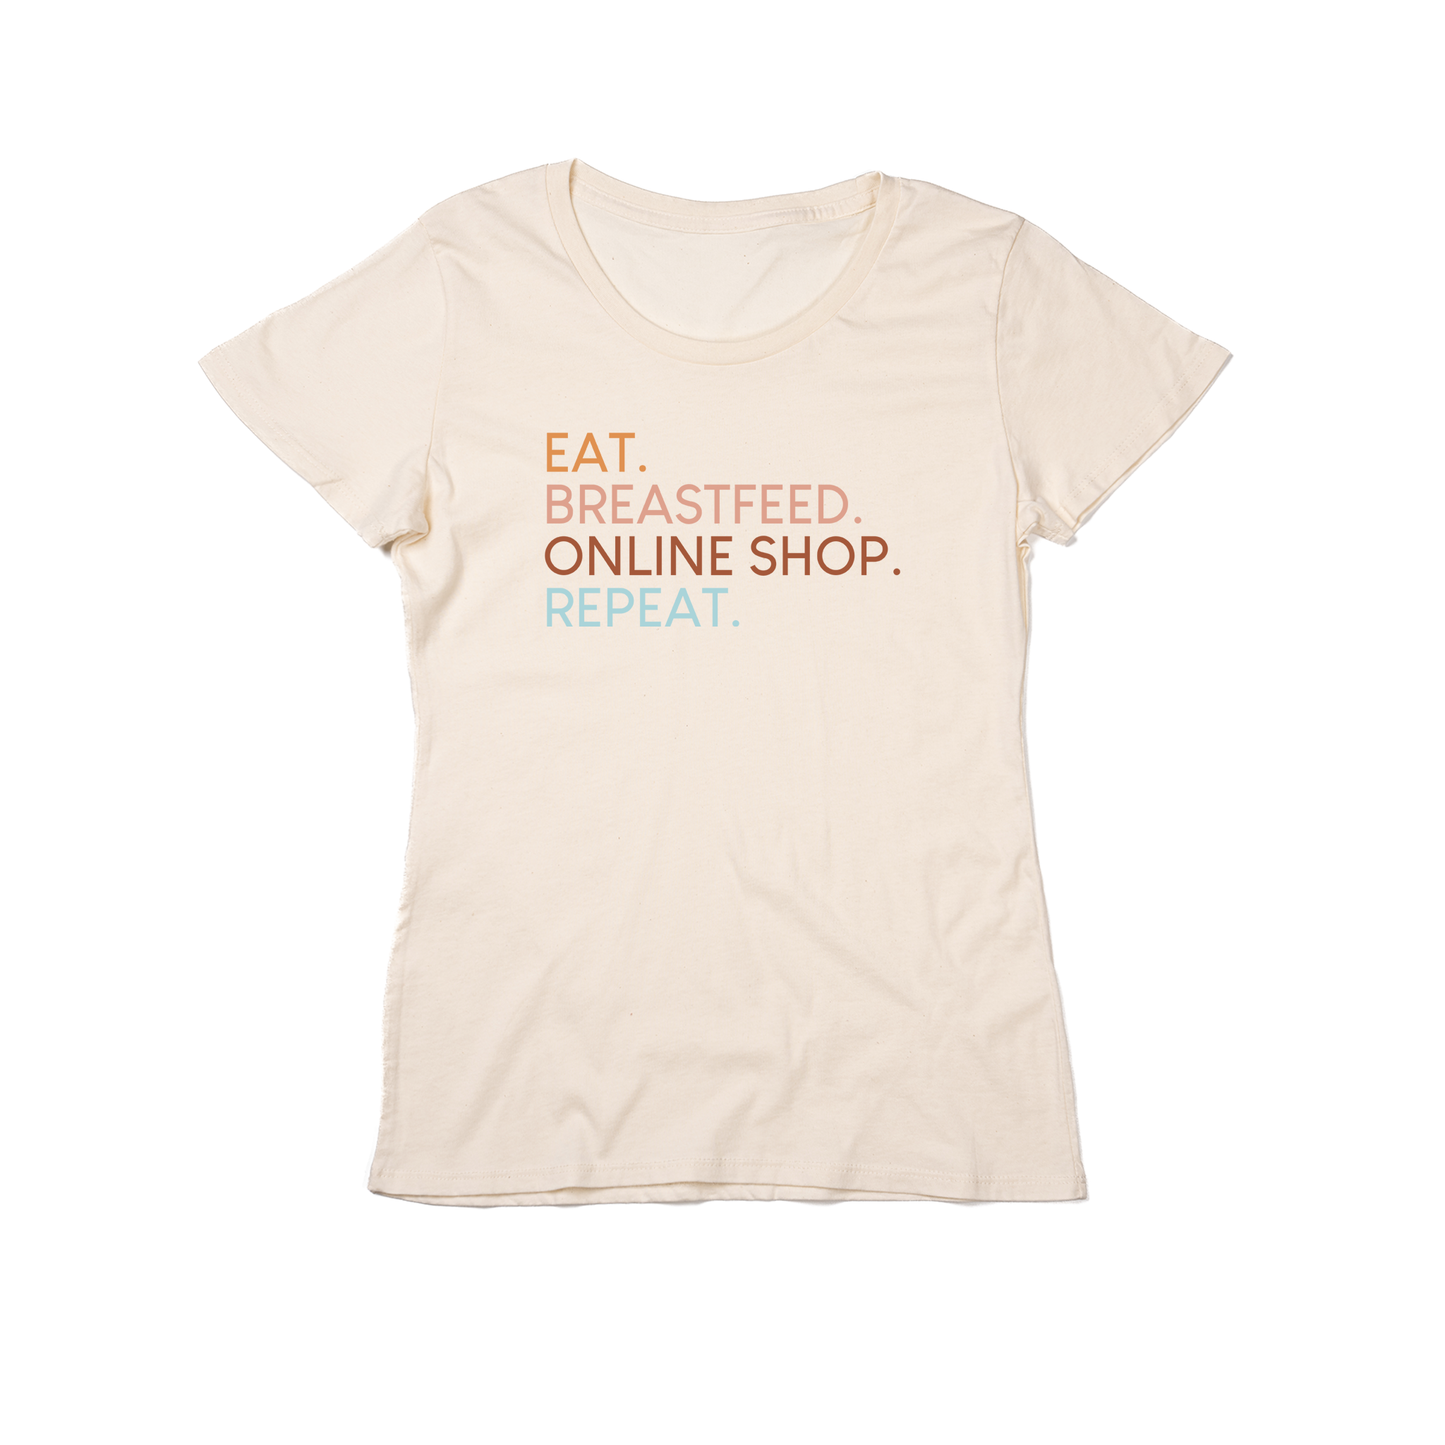 Eat. Breastfeed. Online Shop. Repeat. (Across Front) - Women's Fitted Tee (Natural)